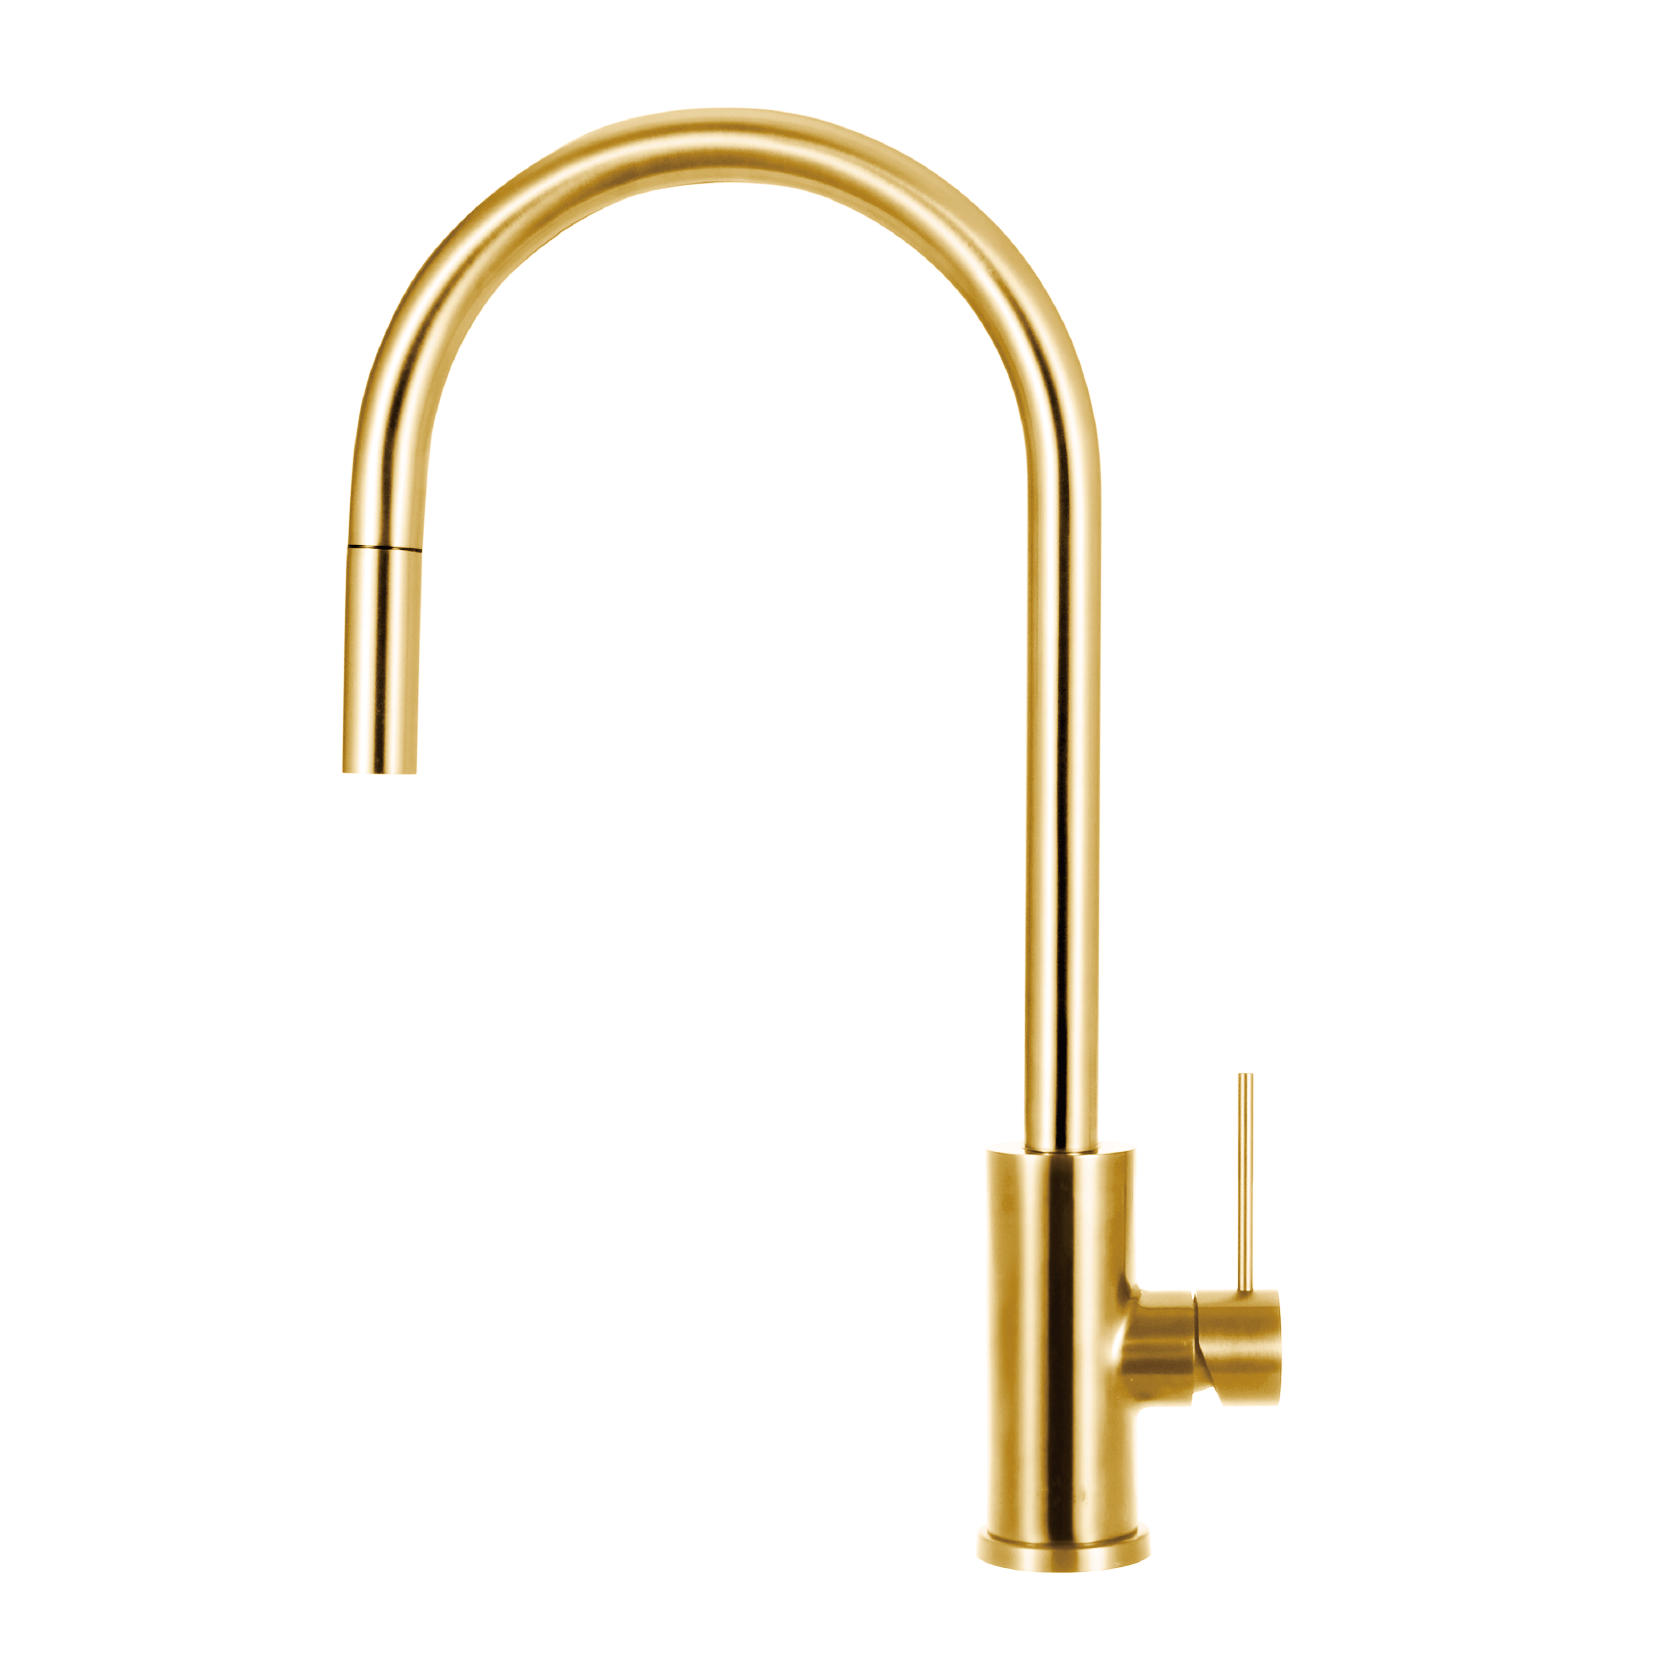 Bexley Ultra Slim Pull Out Kitchen Mixer Brushed Brass